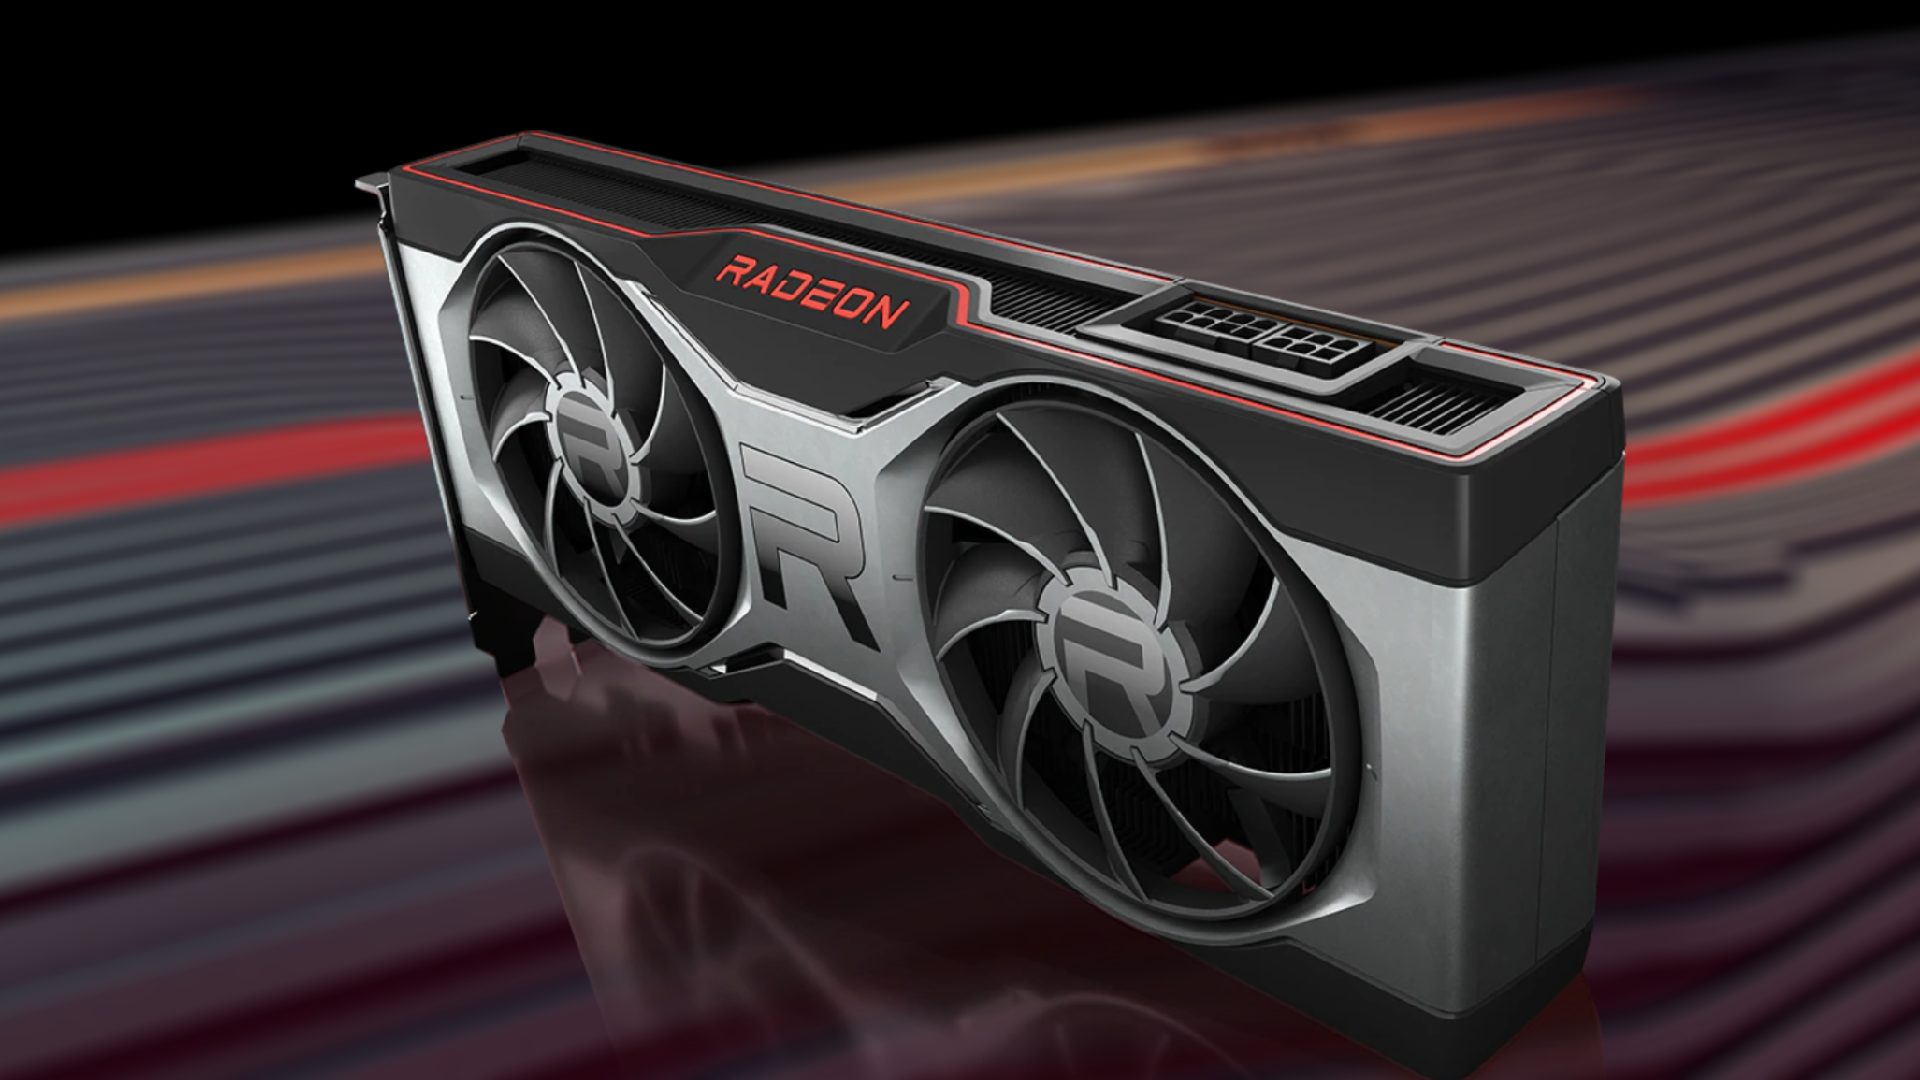 Radeon RX 7900 XTX graphics cards heat up to 110 degrees. But AMD assures that this is normal